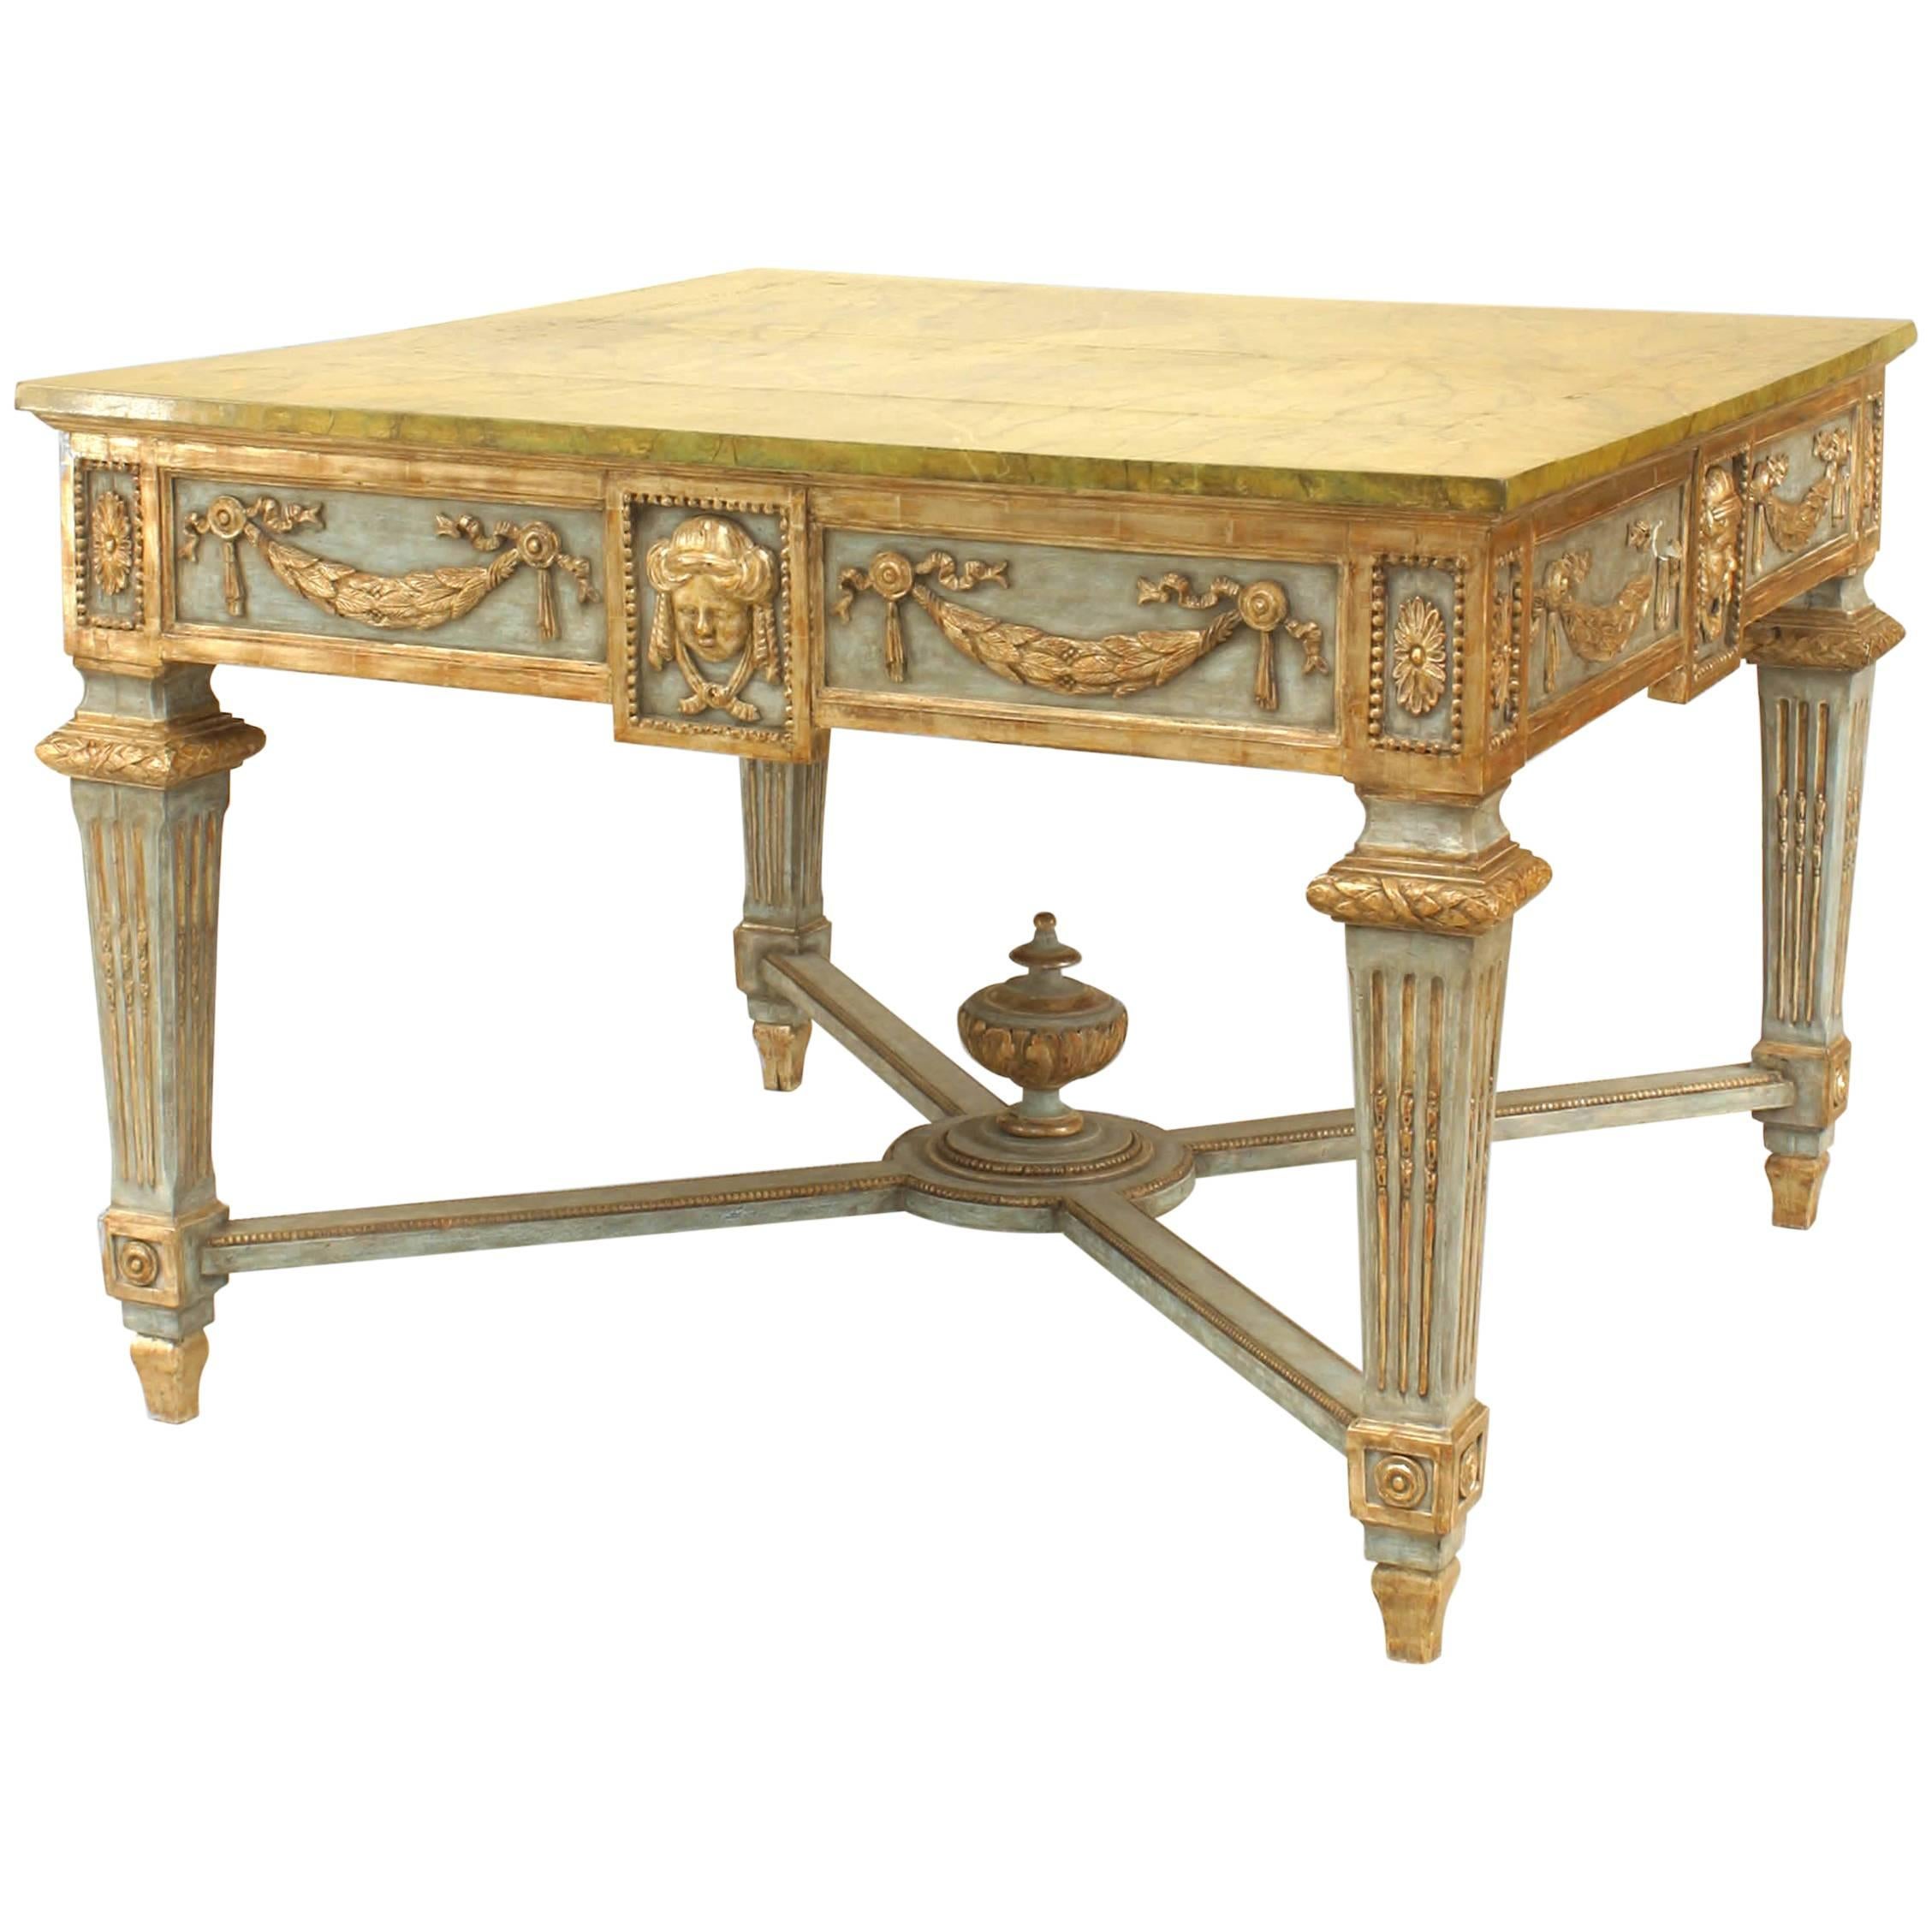 Northern Italian Neo-Classic Faux Marble Center Table